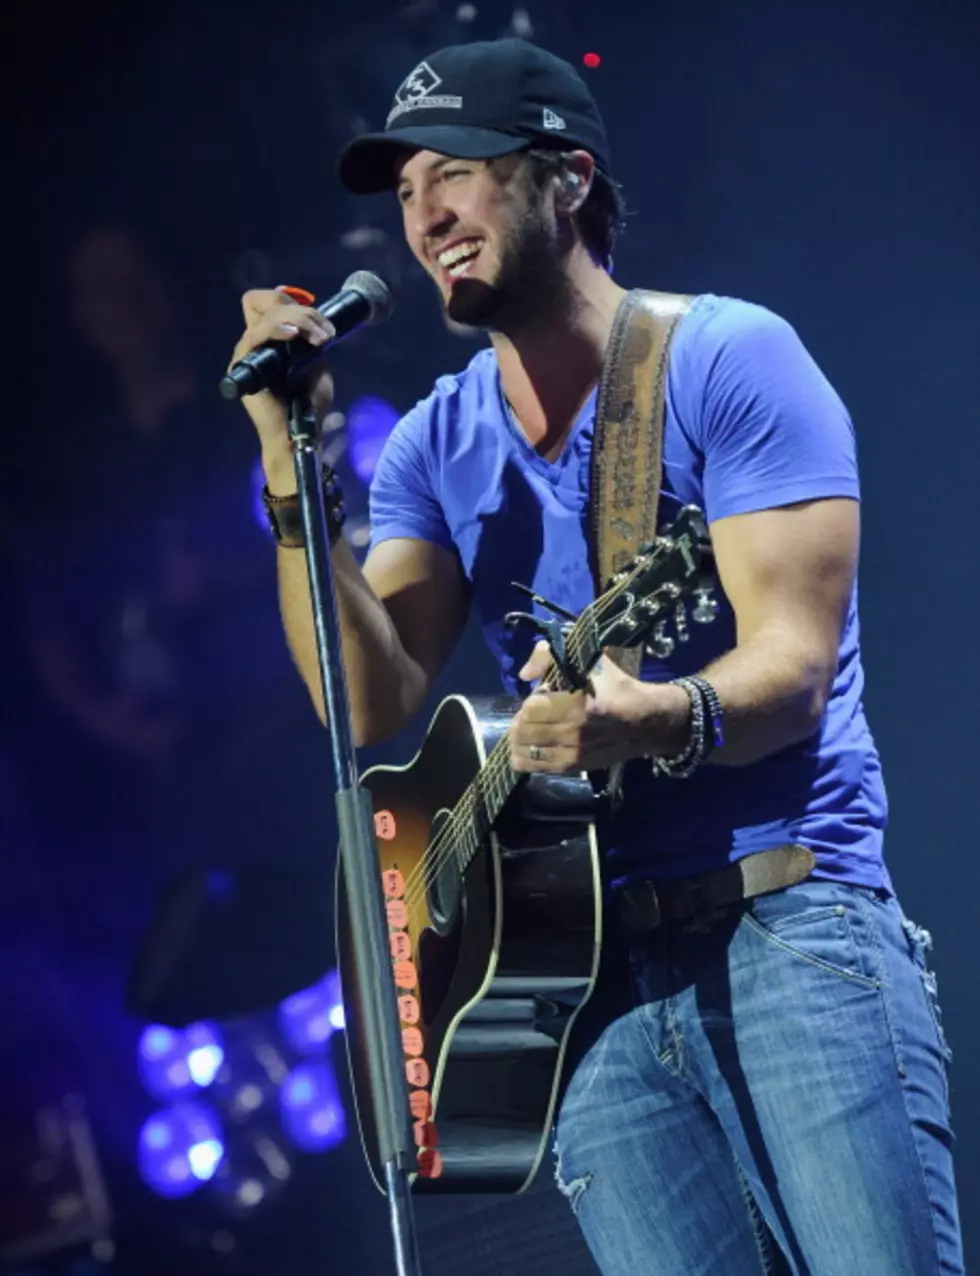 Luke Bryan Goes Against D Vincent Williams on Today’s Country Clash [AUDIO/POLL]